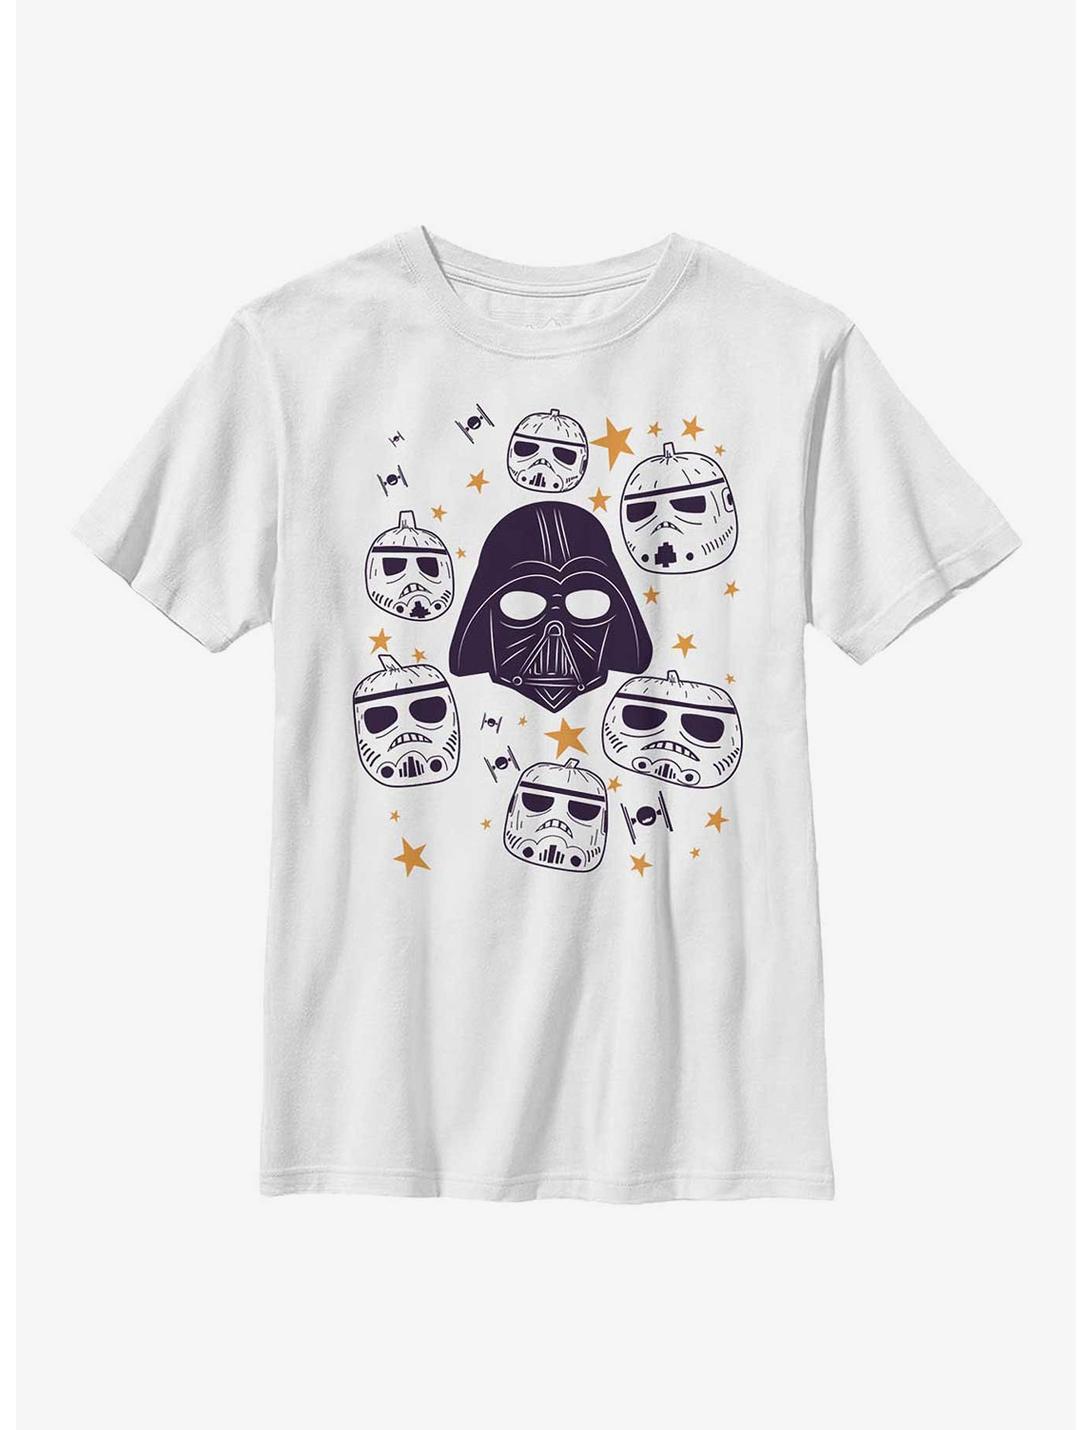 Star Wars Pumpkin Troopers Youth T-Shirt, WHITE, hi-res